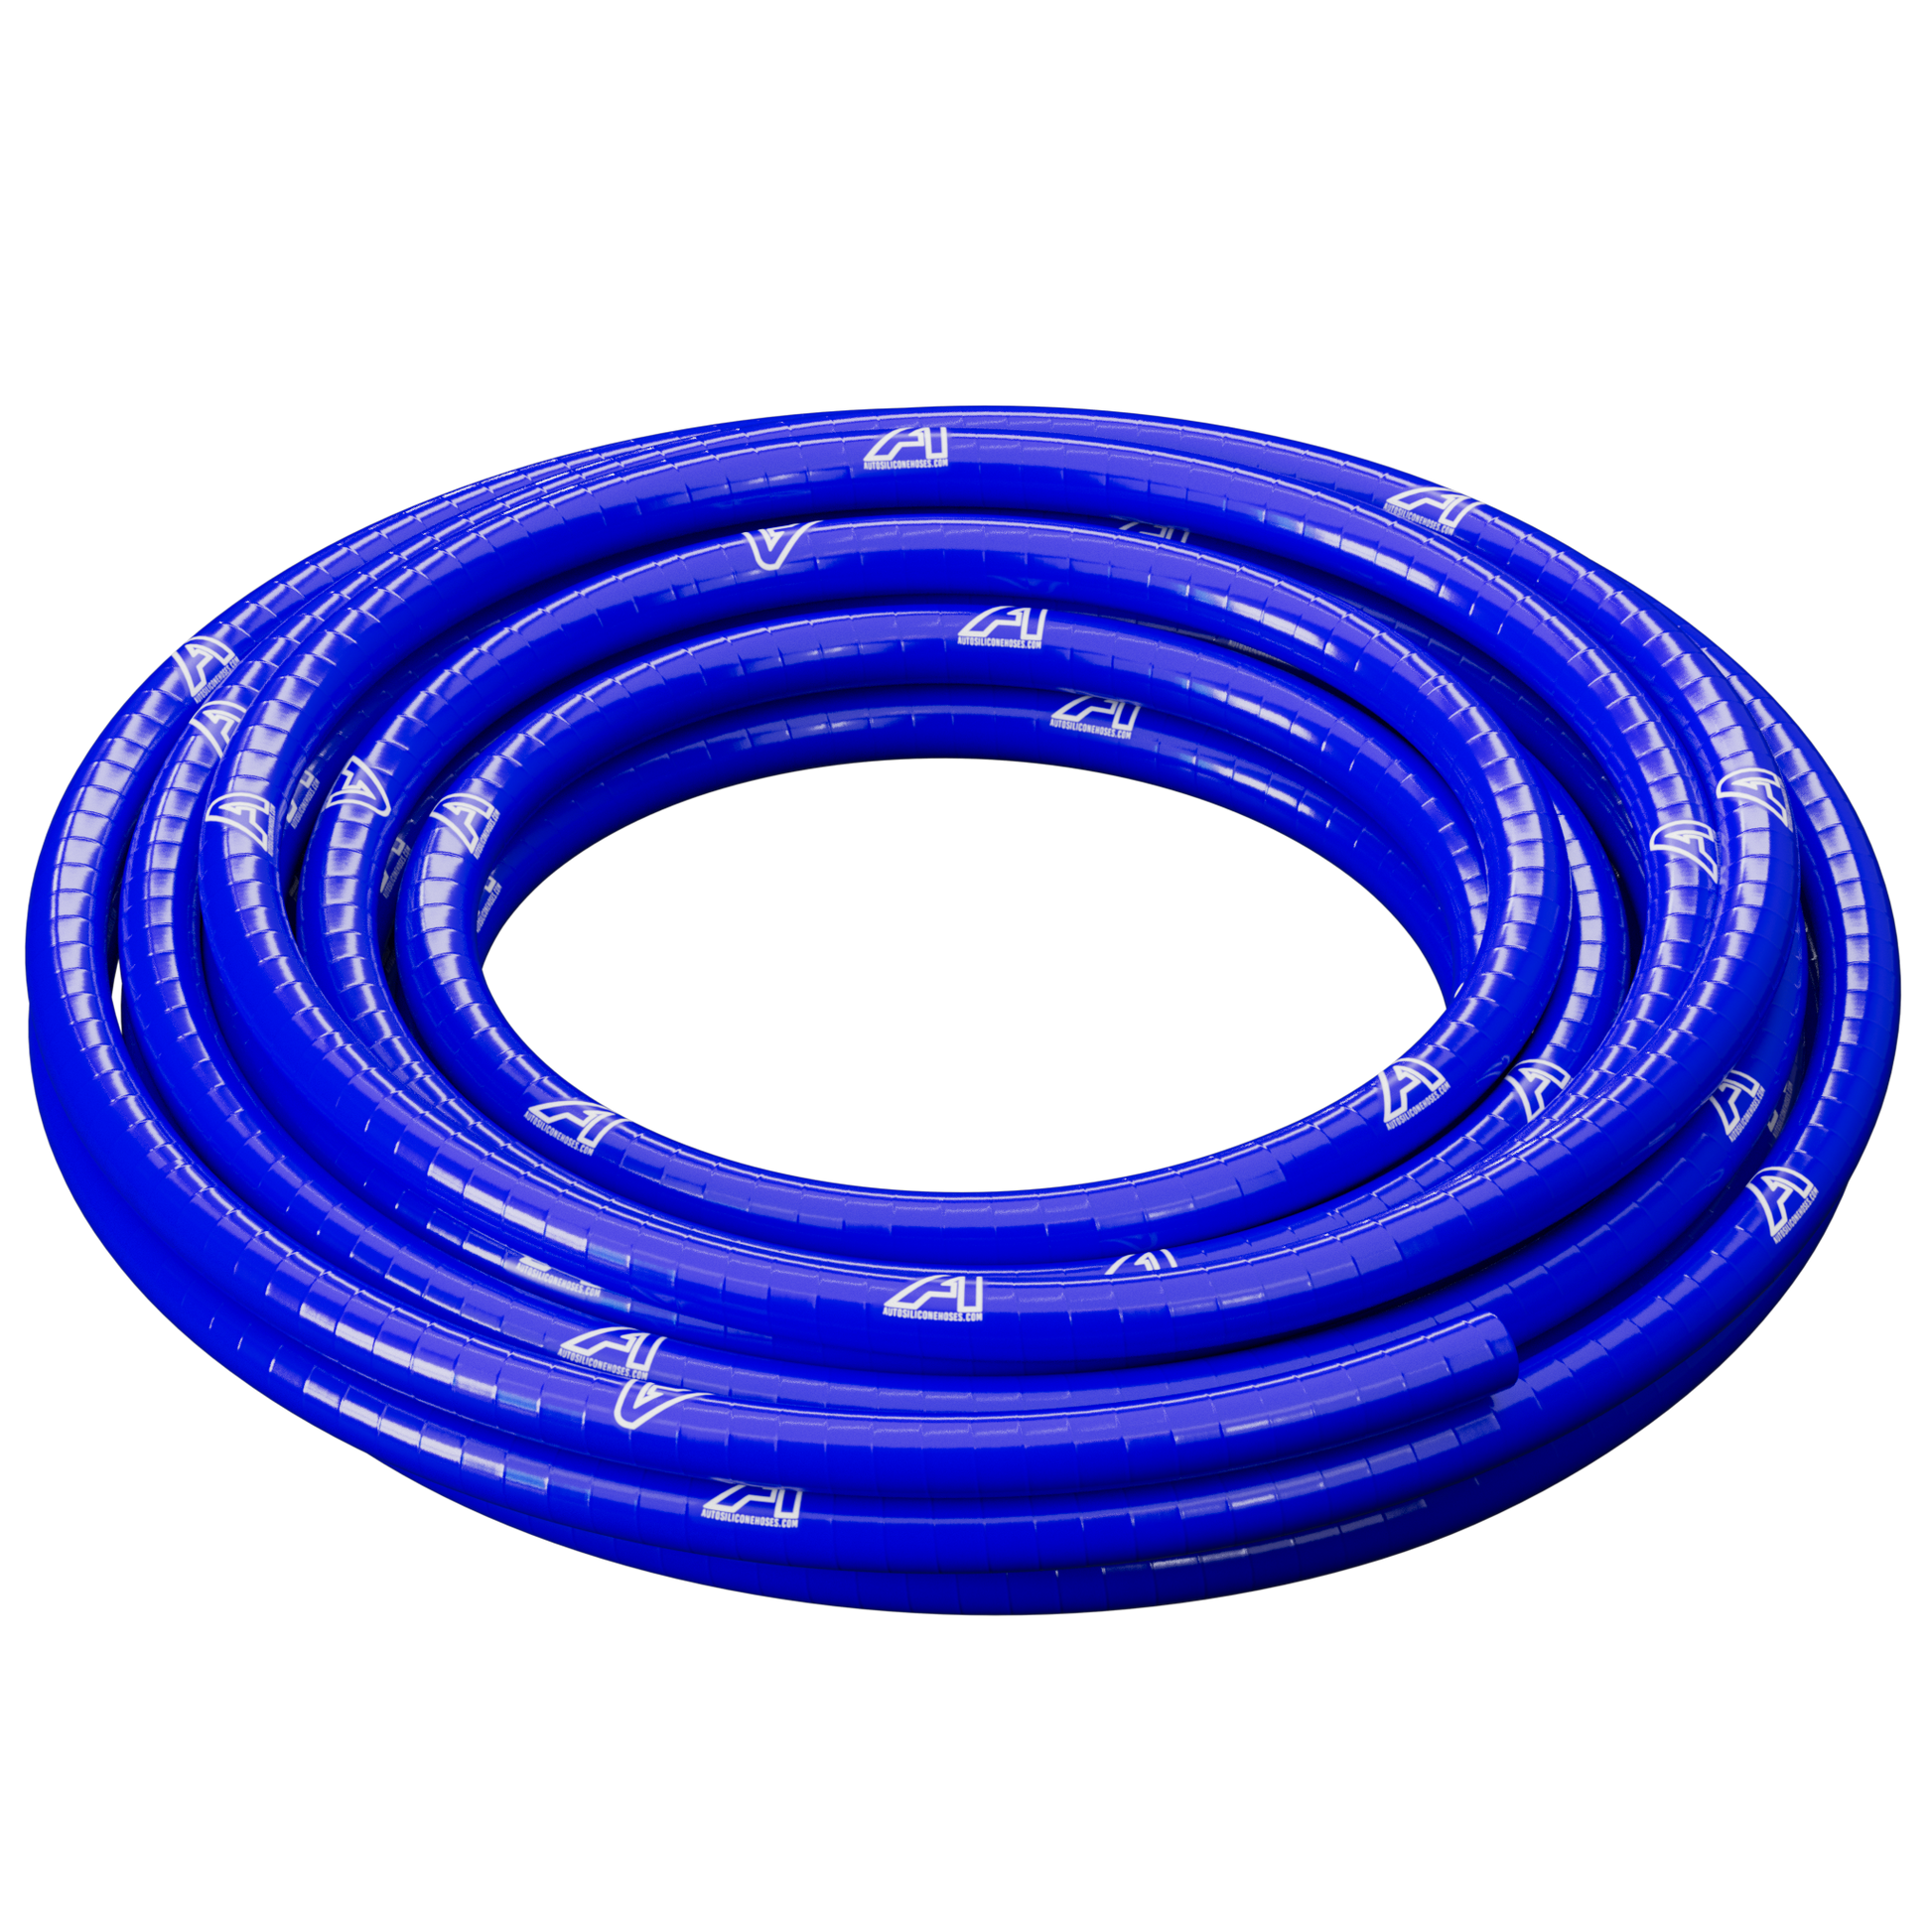 25mm ID Blue Continuous Silicone Hose Motor Vehicle Engine Parts Auto Silicone Hoses   